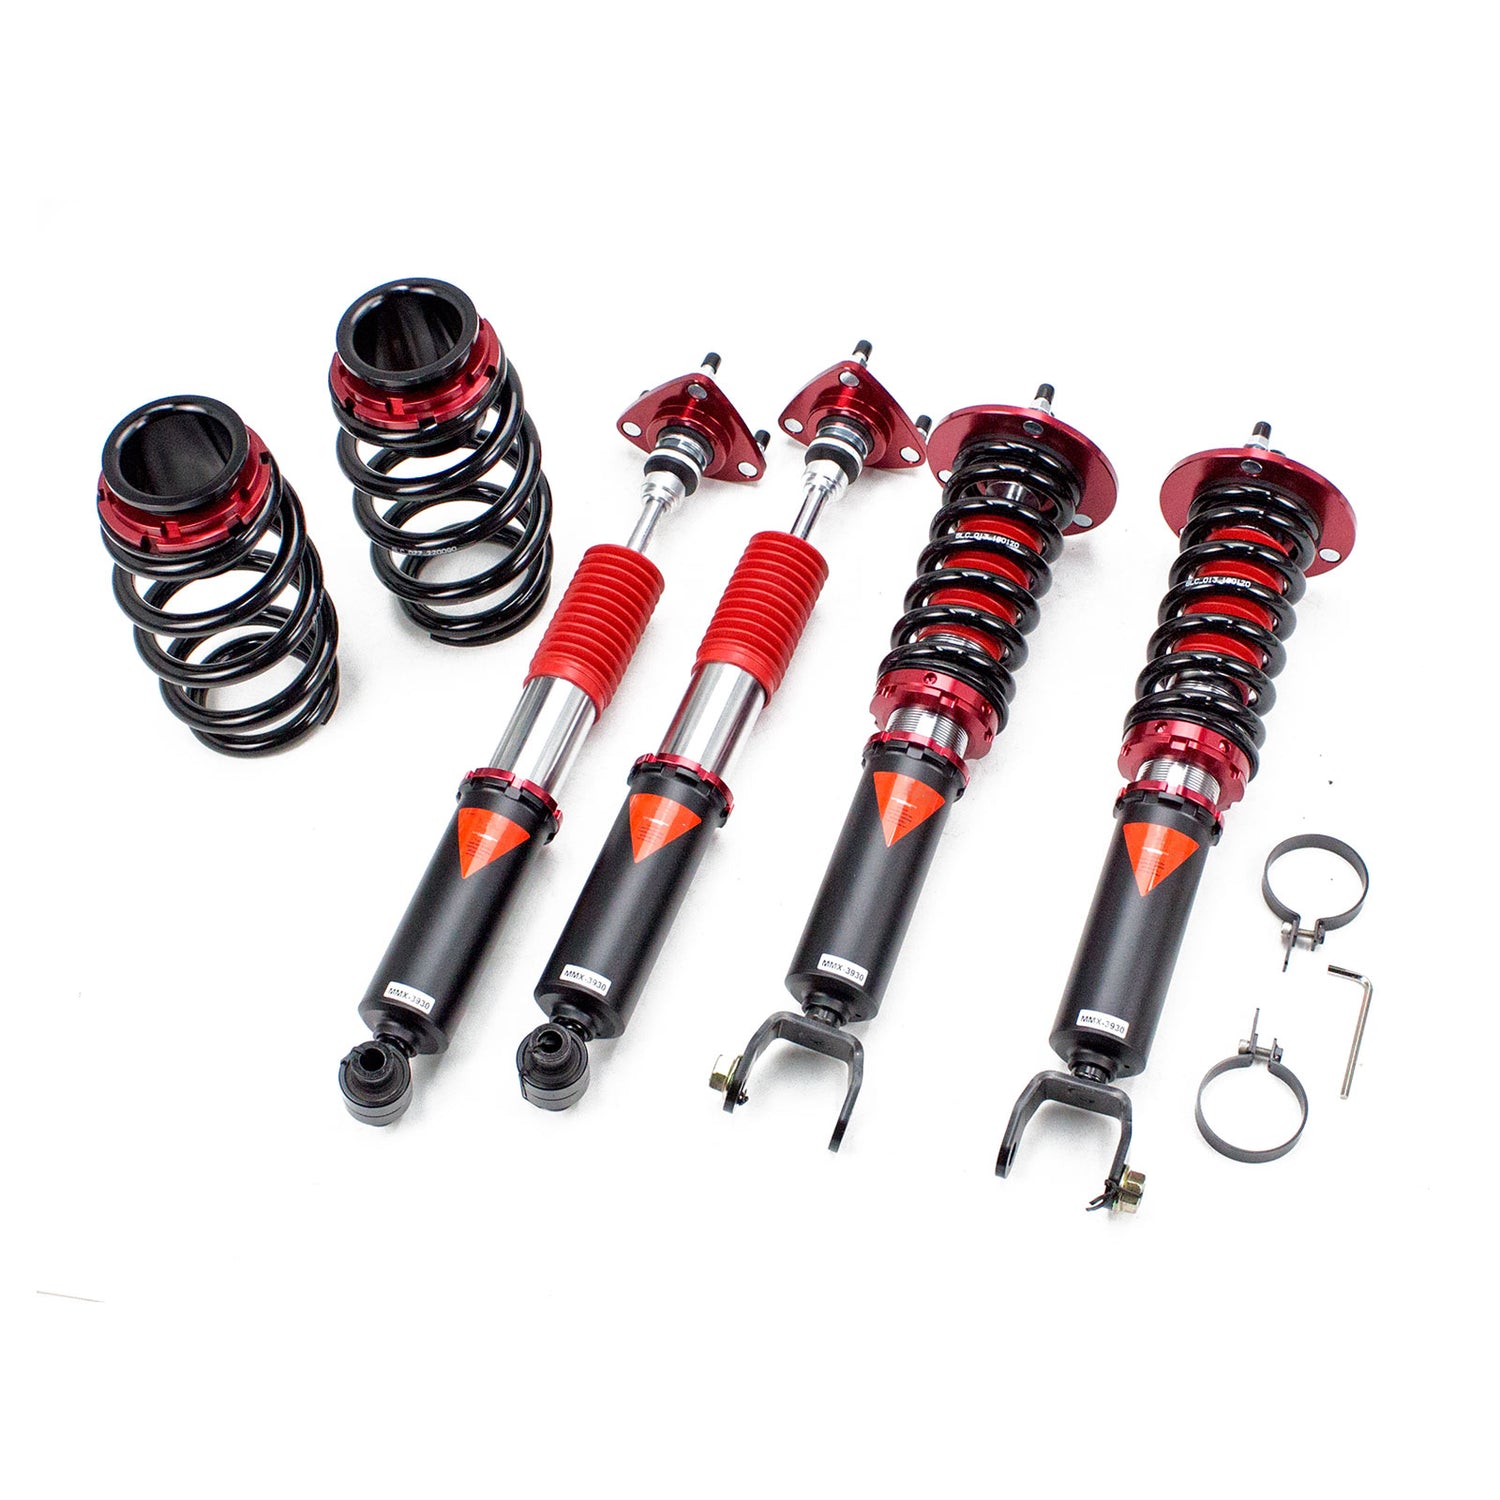 MMX3930 MAXX Coilovers Lowering Kit, Fully Adjustable, Ride Height, 40 Clicks Rebound Settings